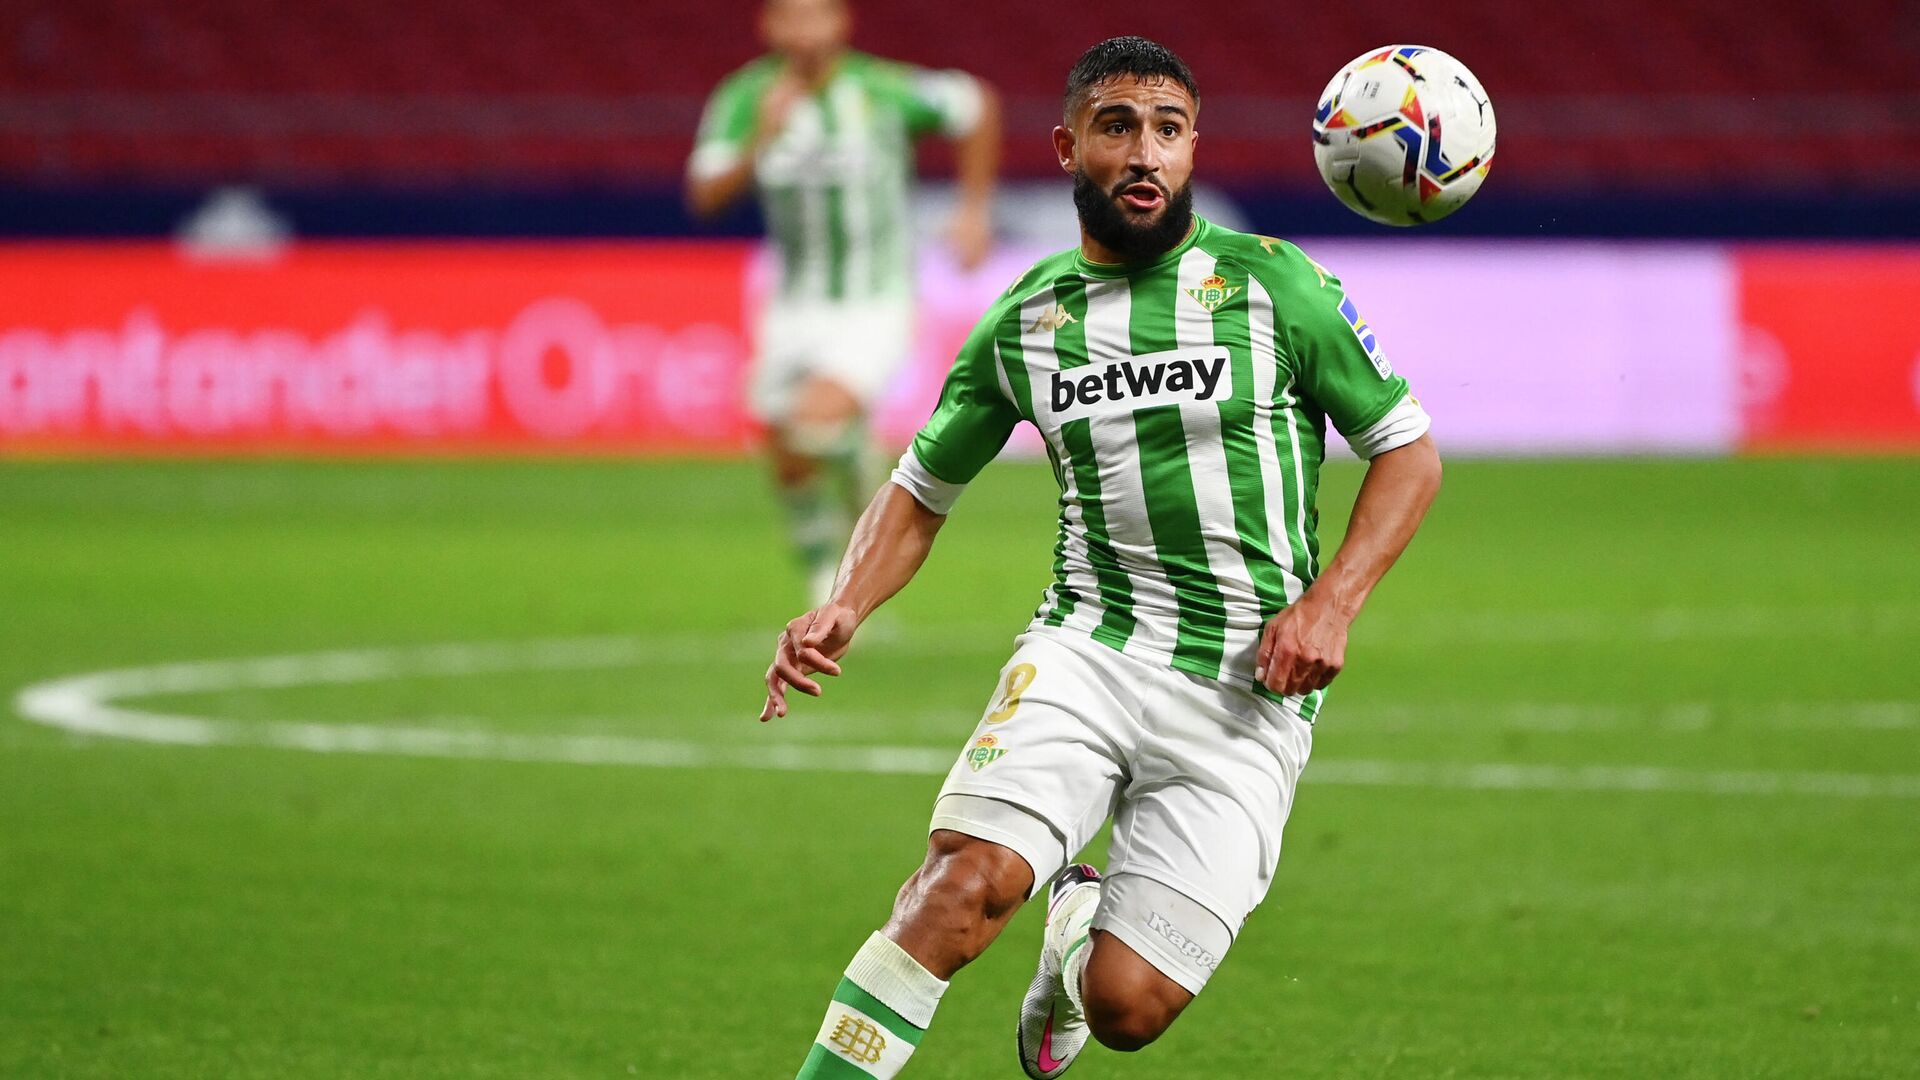 Real Betis' French midfielder Nabil Fekir controls the ball during the Spanish League football match between Atletico Madrid and Real Betis at the Wanda Metropolitan stadium in Madrid on October 24, 2020. (Photo by GABRIEL BOUYS / AFP) - РИА Новости, 1920, 20.03.2021